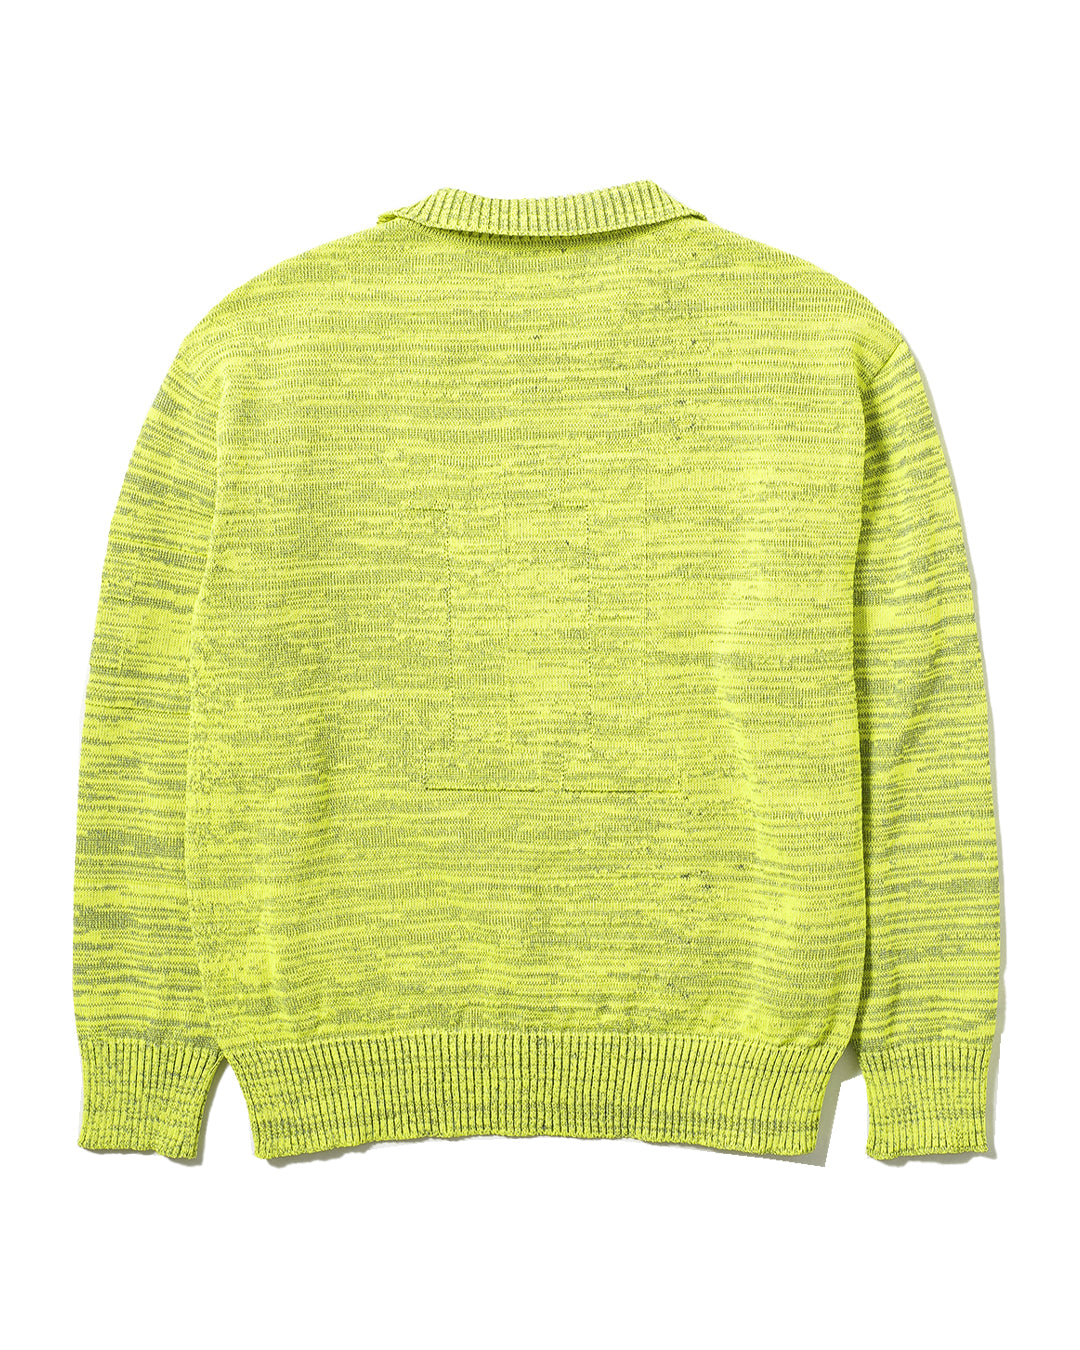 REFLECTOR FOOTBALL KNIT (YEL) - Baby's all right